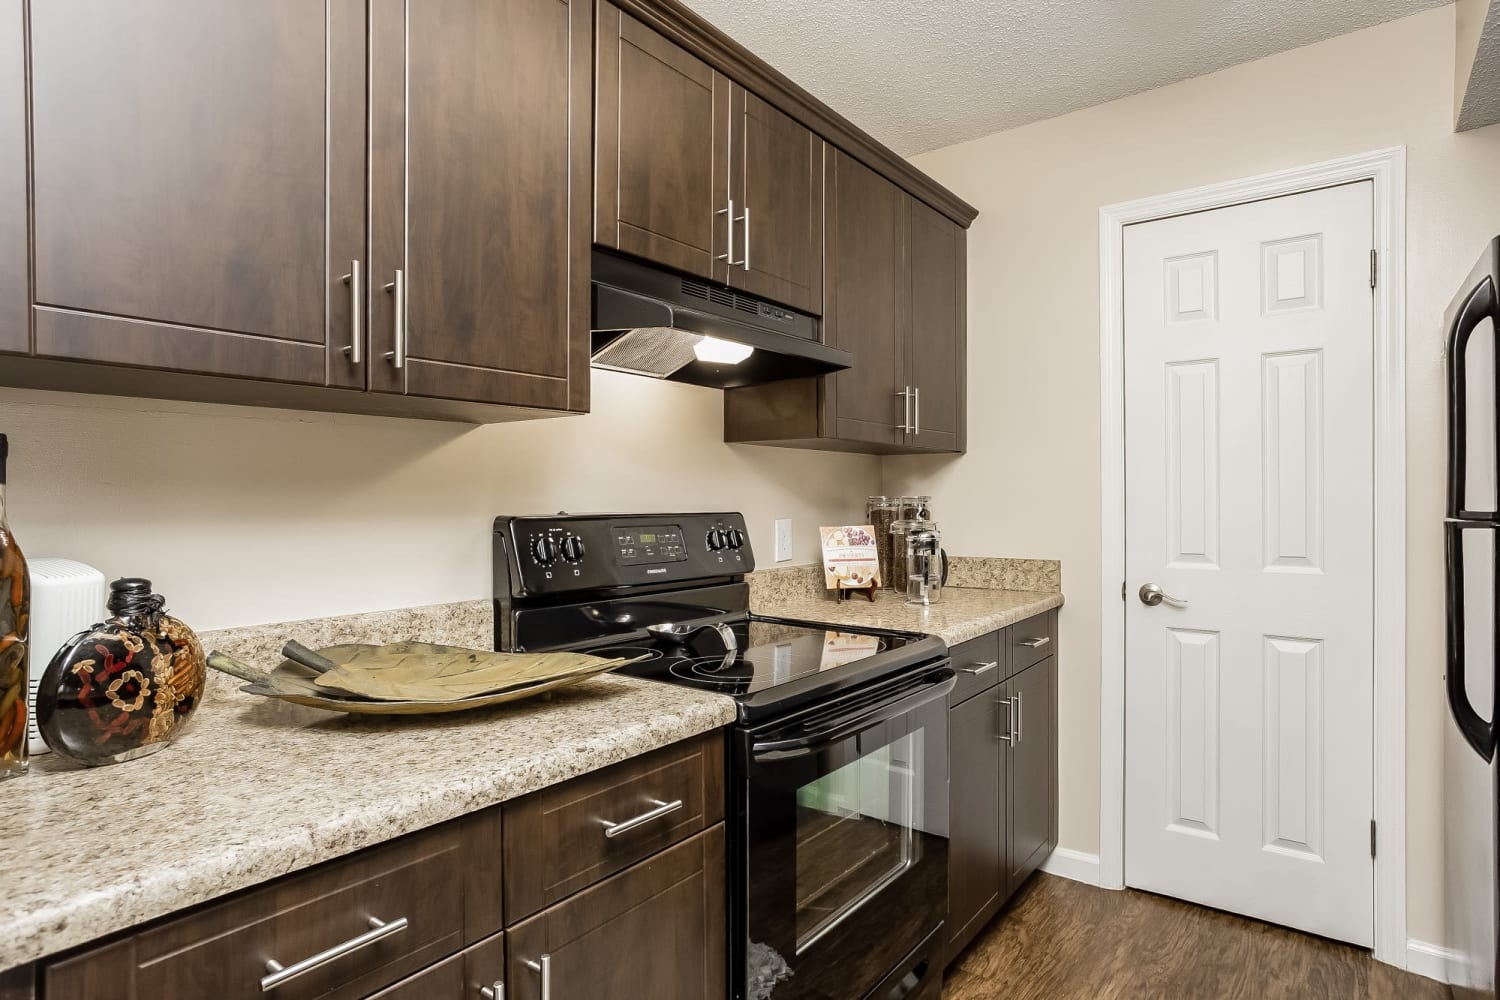 Kitchen at Tuscany Pointe at Somerset Place Apartment Homes in Boca Raton, Florida